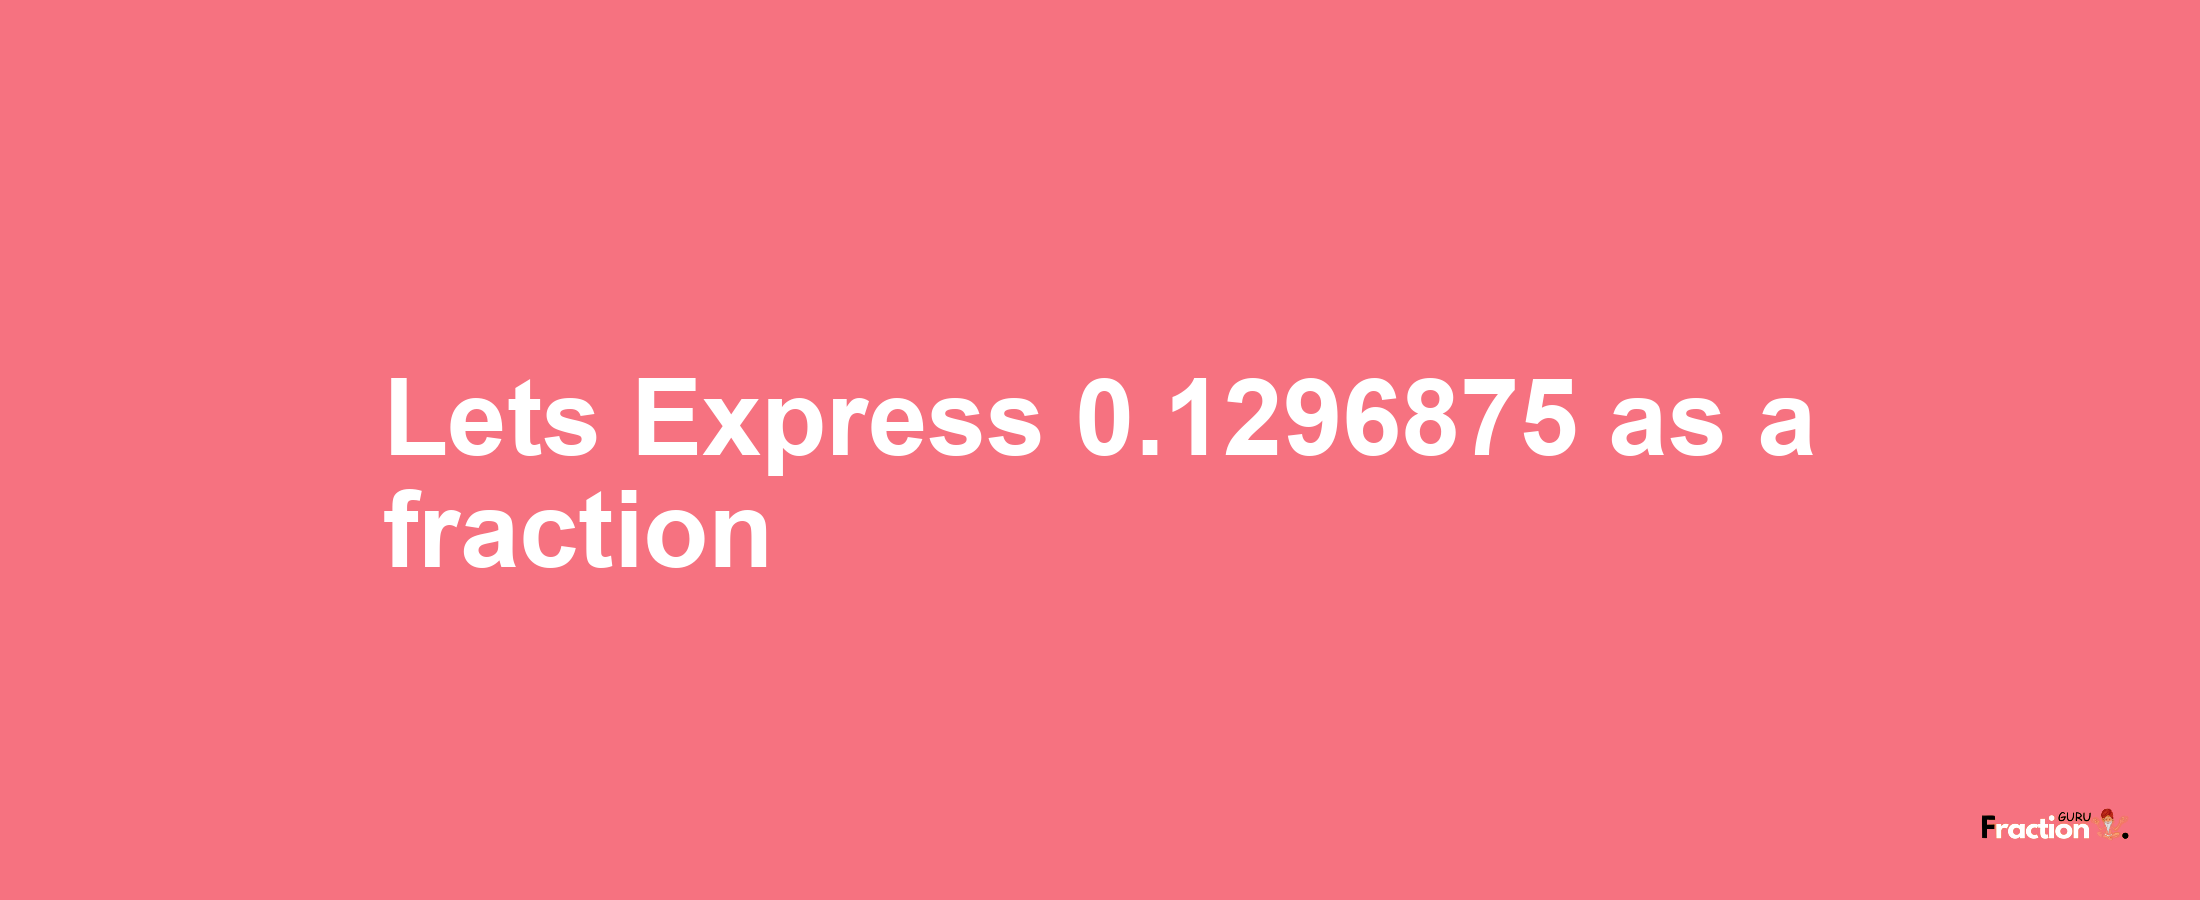 Lets Express 0.1296875 as afraction